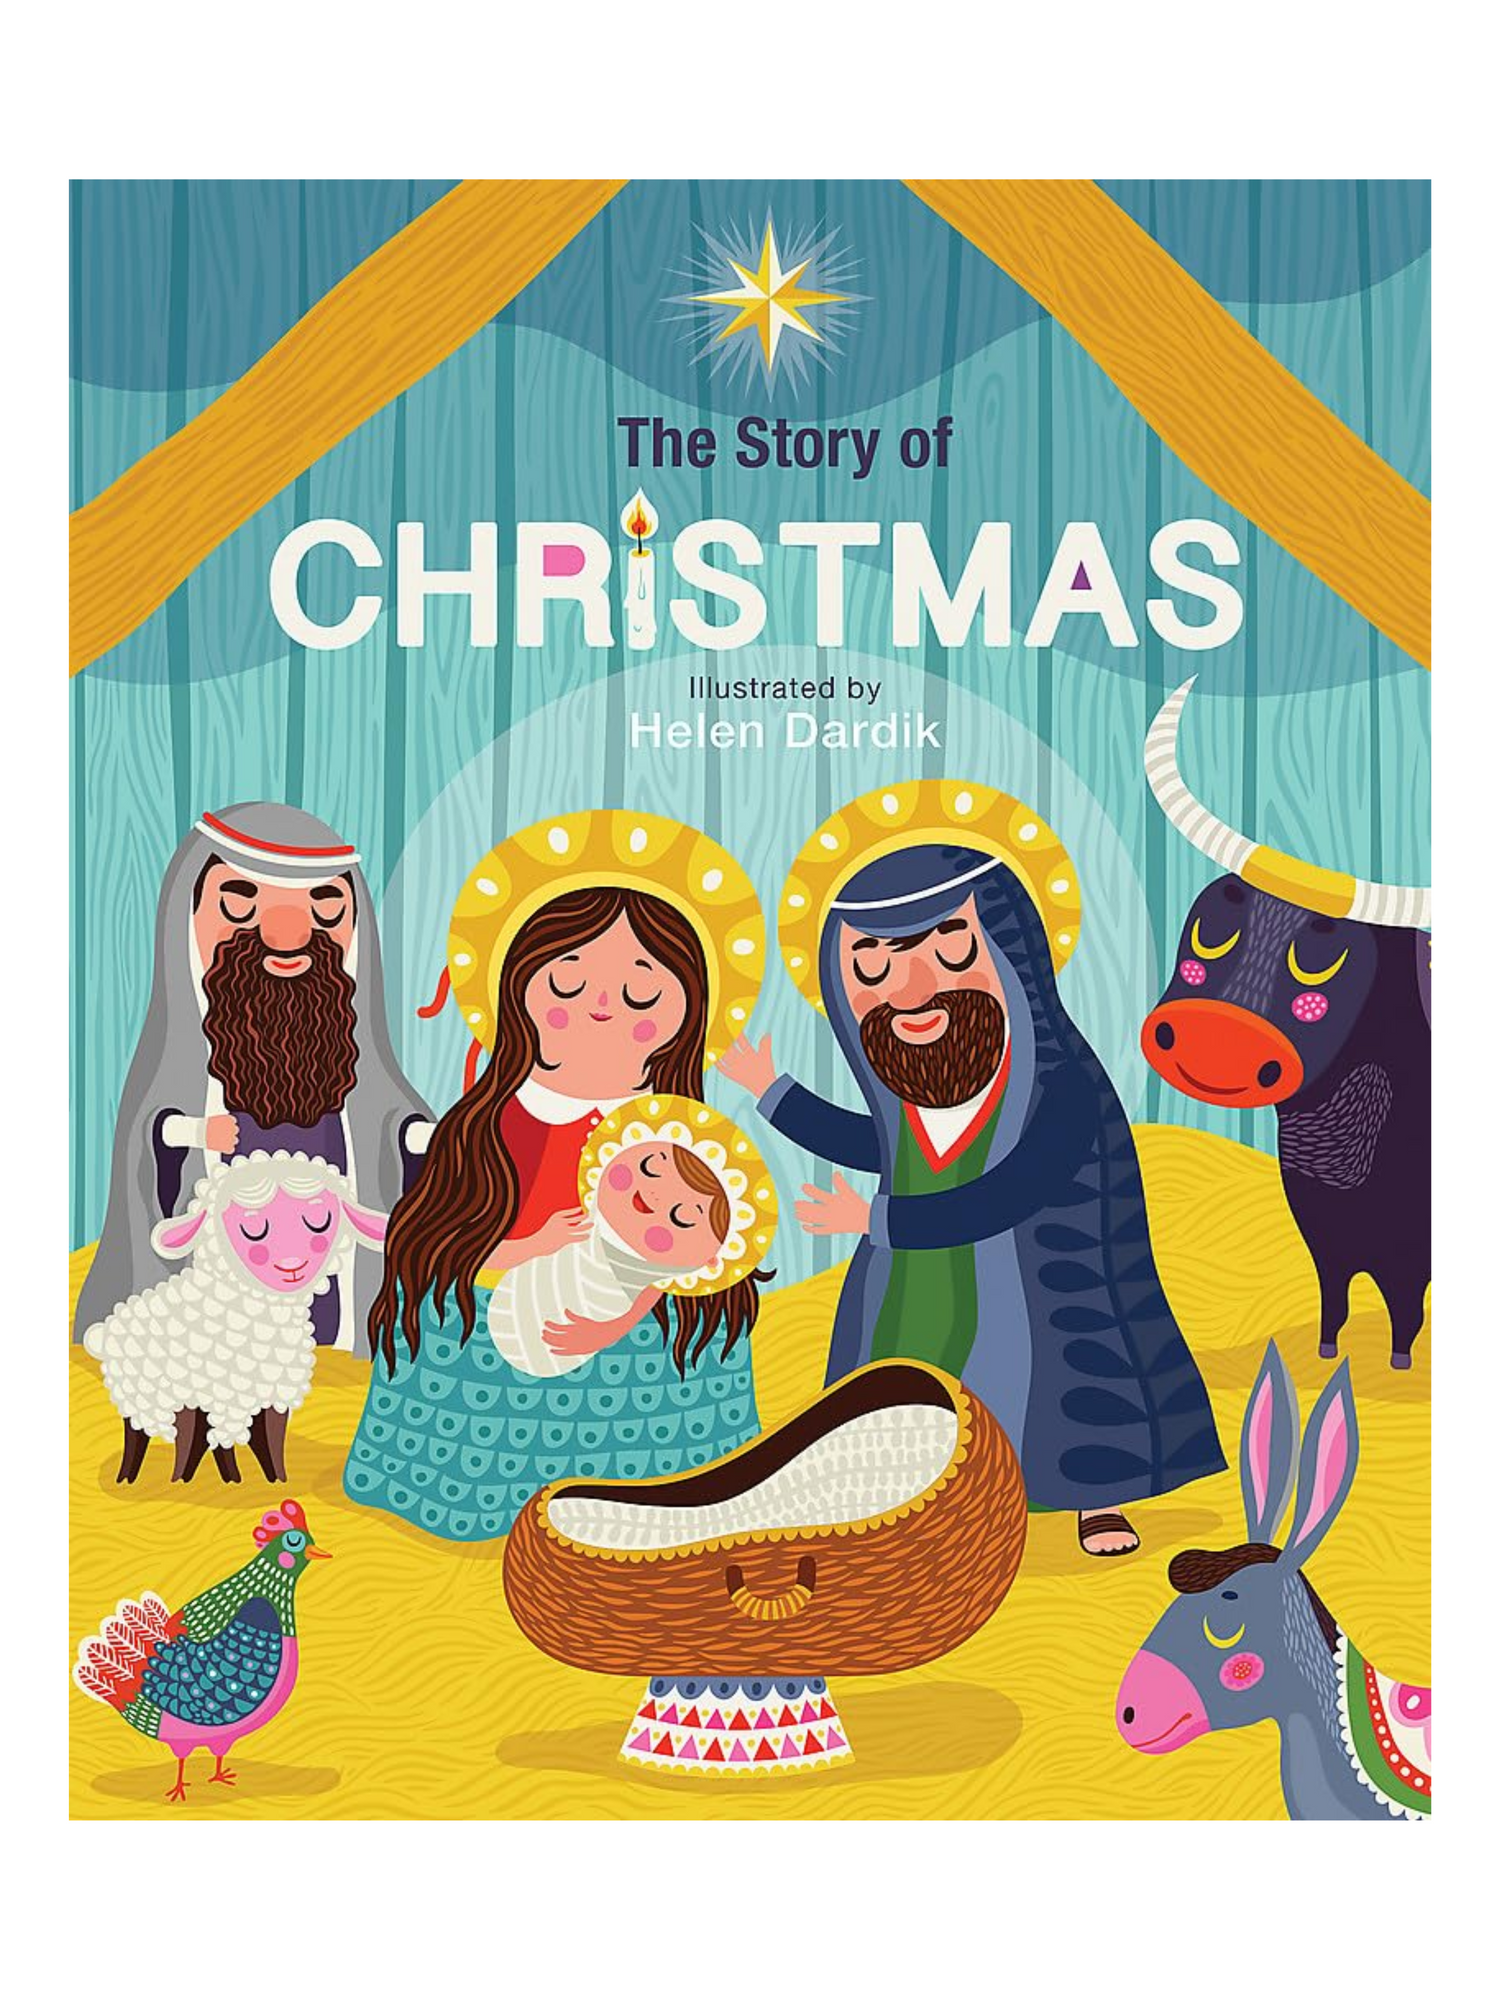 THE STORY OF CHRISTMAS CHILDREN'S BOOK - THE LITTLE EAGLE BOUTIQUE